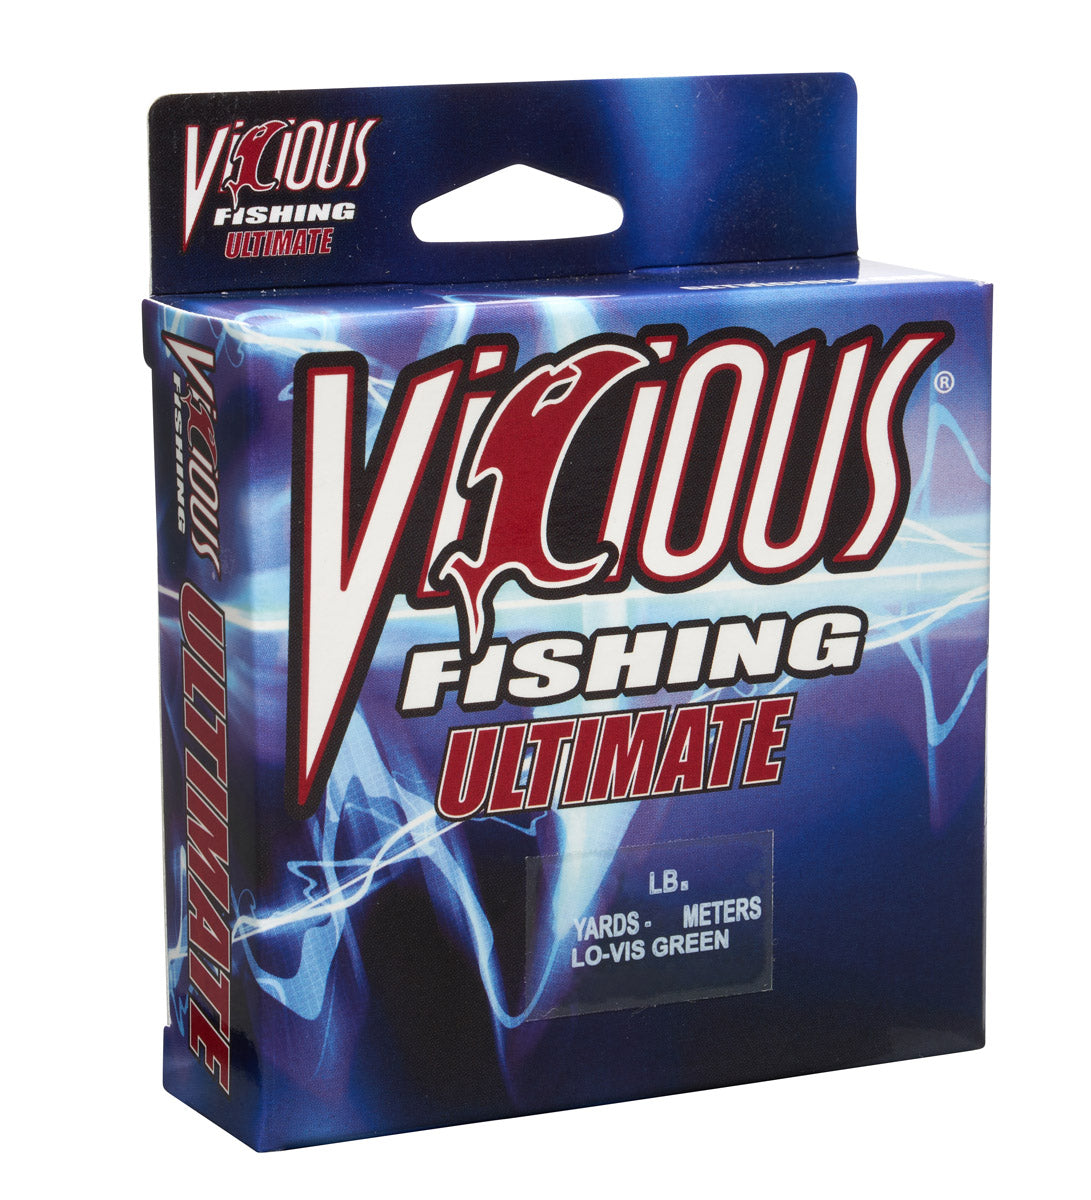 Vicious Fishing Ultimate Clear Blue Fluorescent Mono - 4LB, 11200 Yards